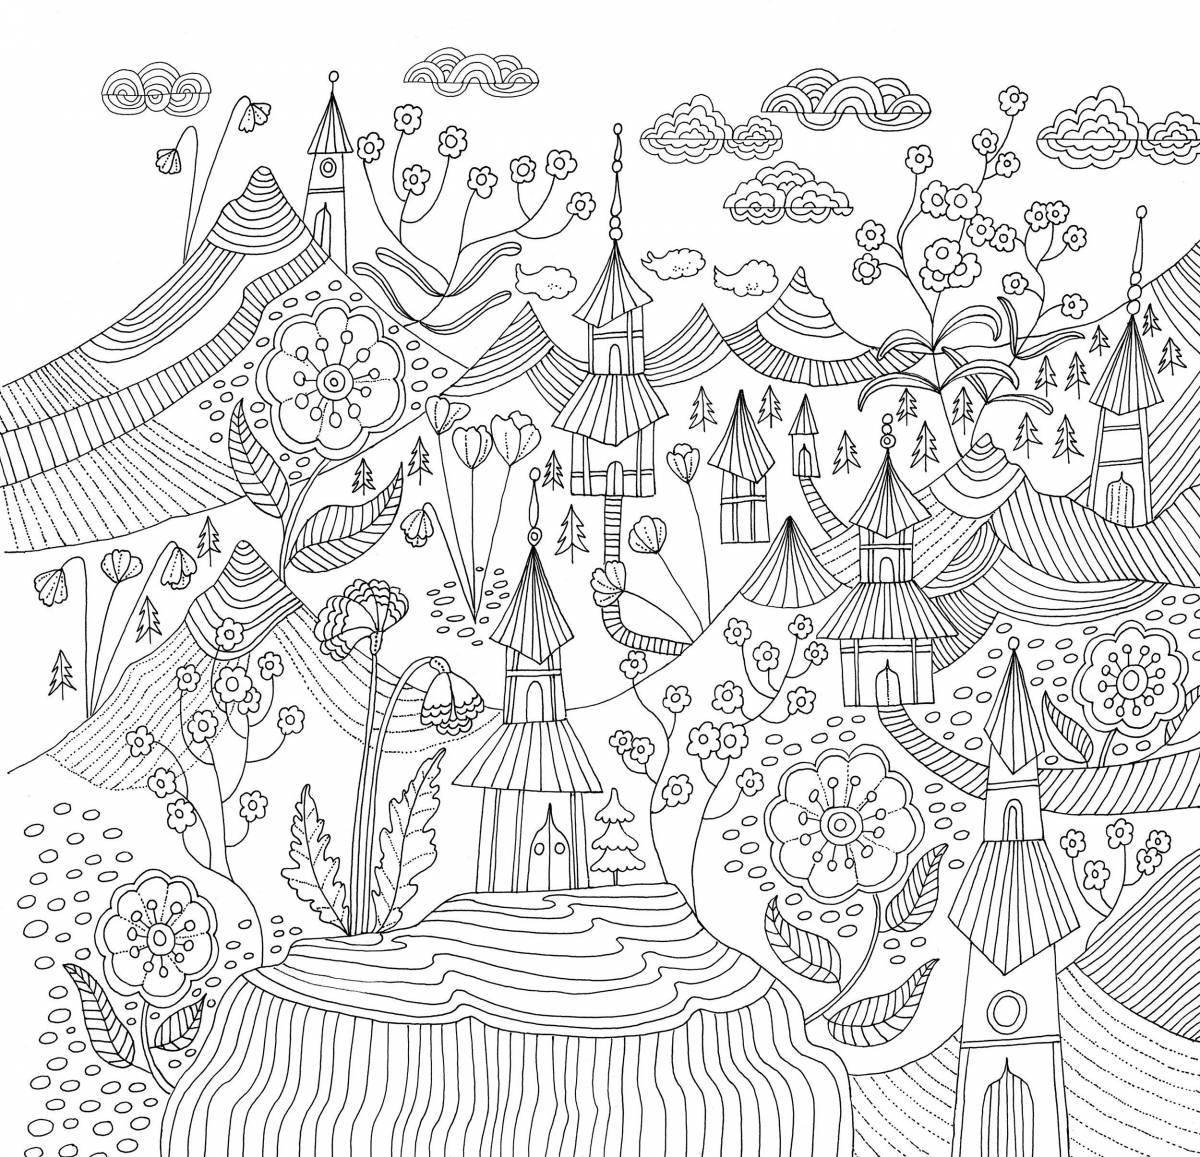 Fun coloring book with Japanese motifs